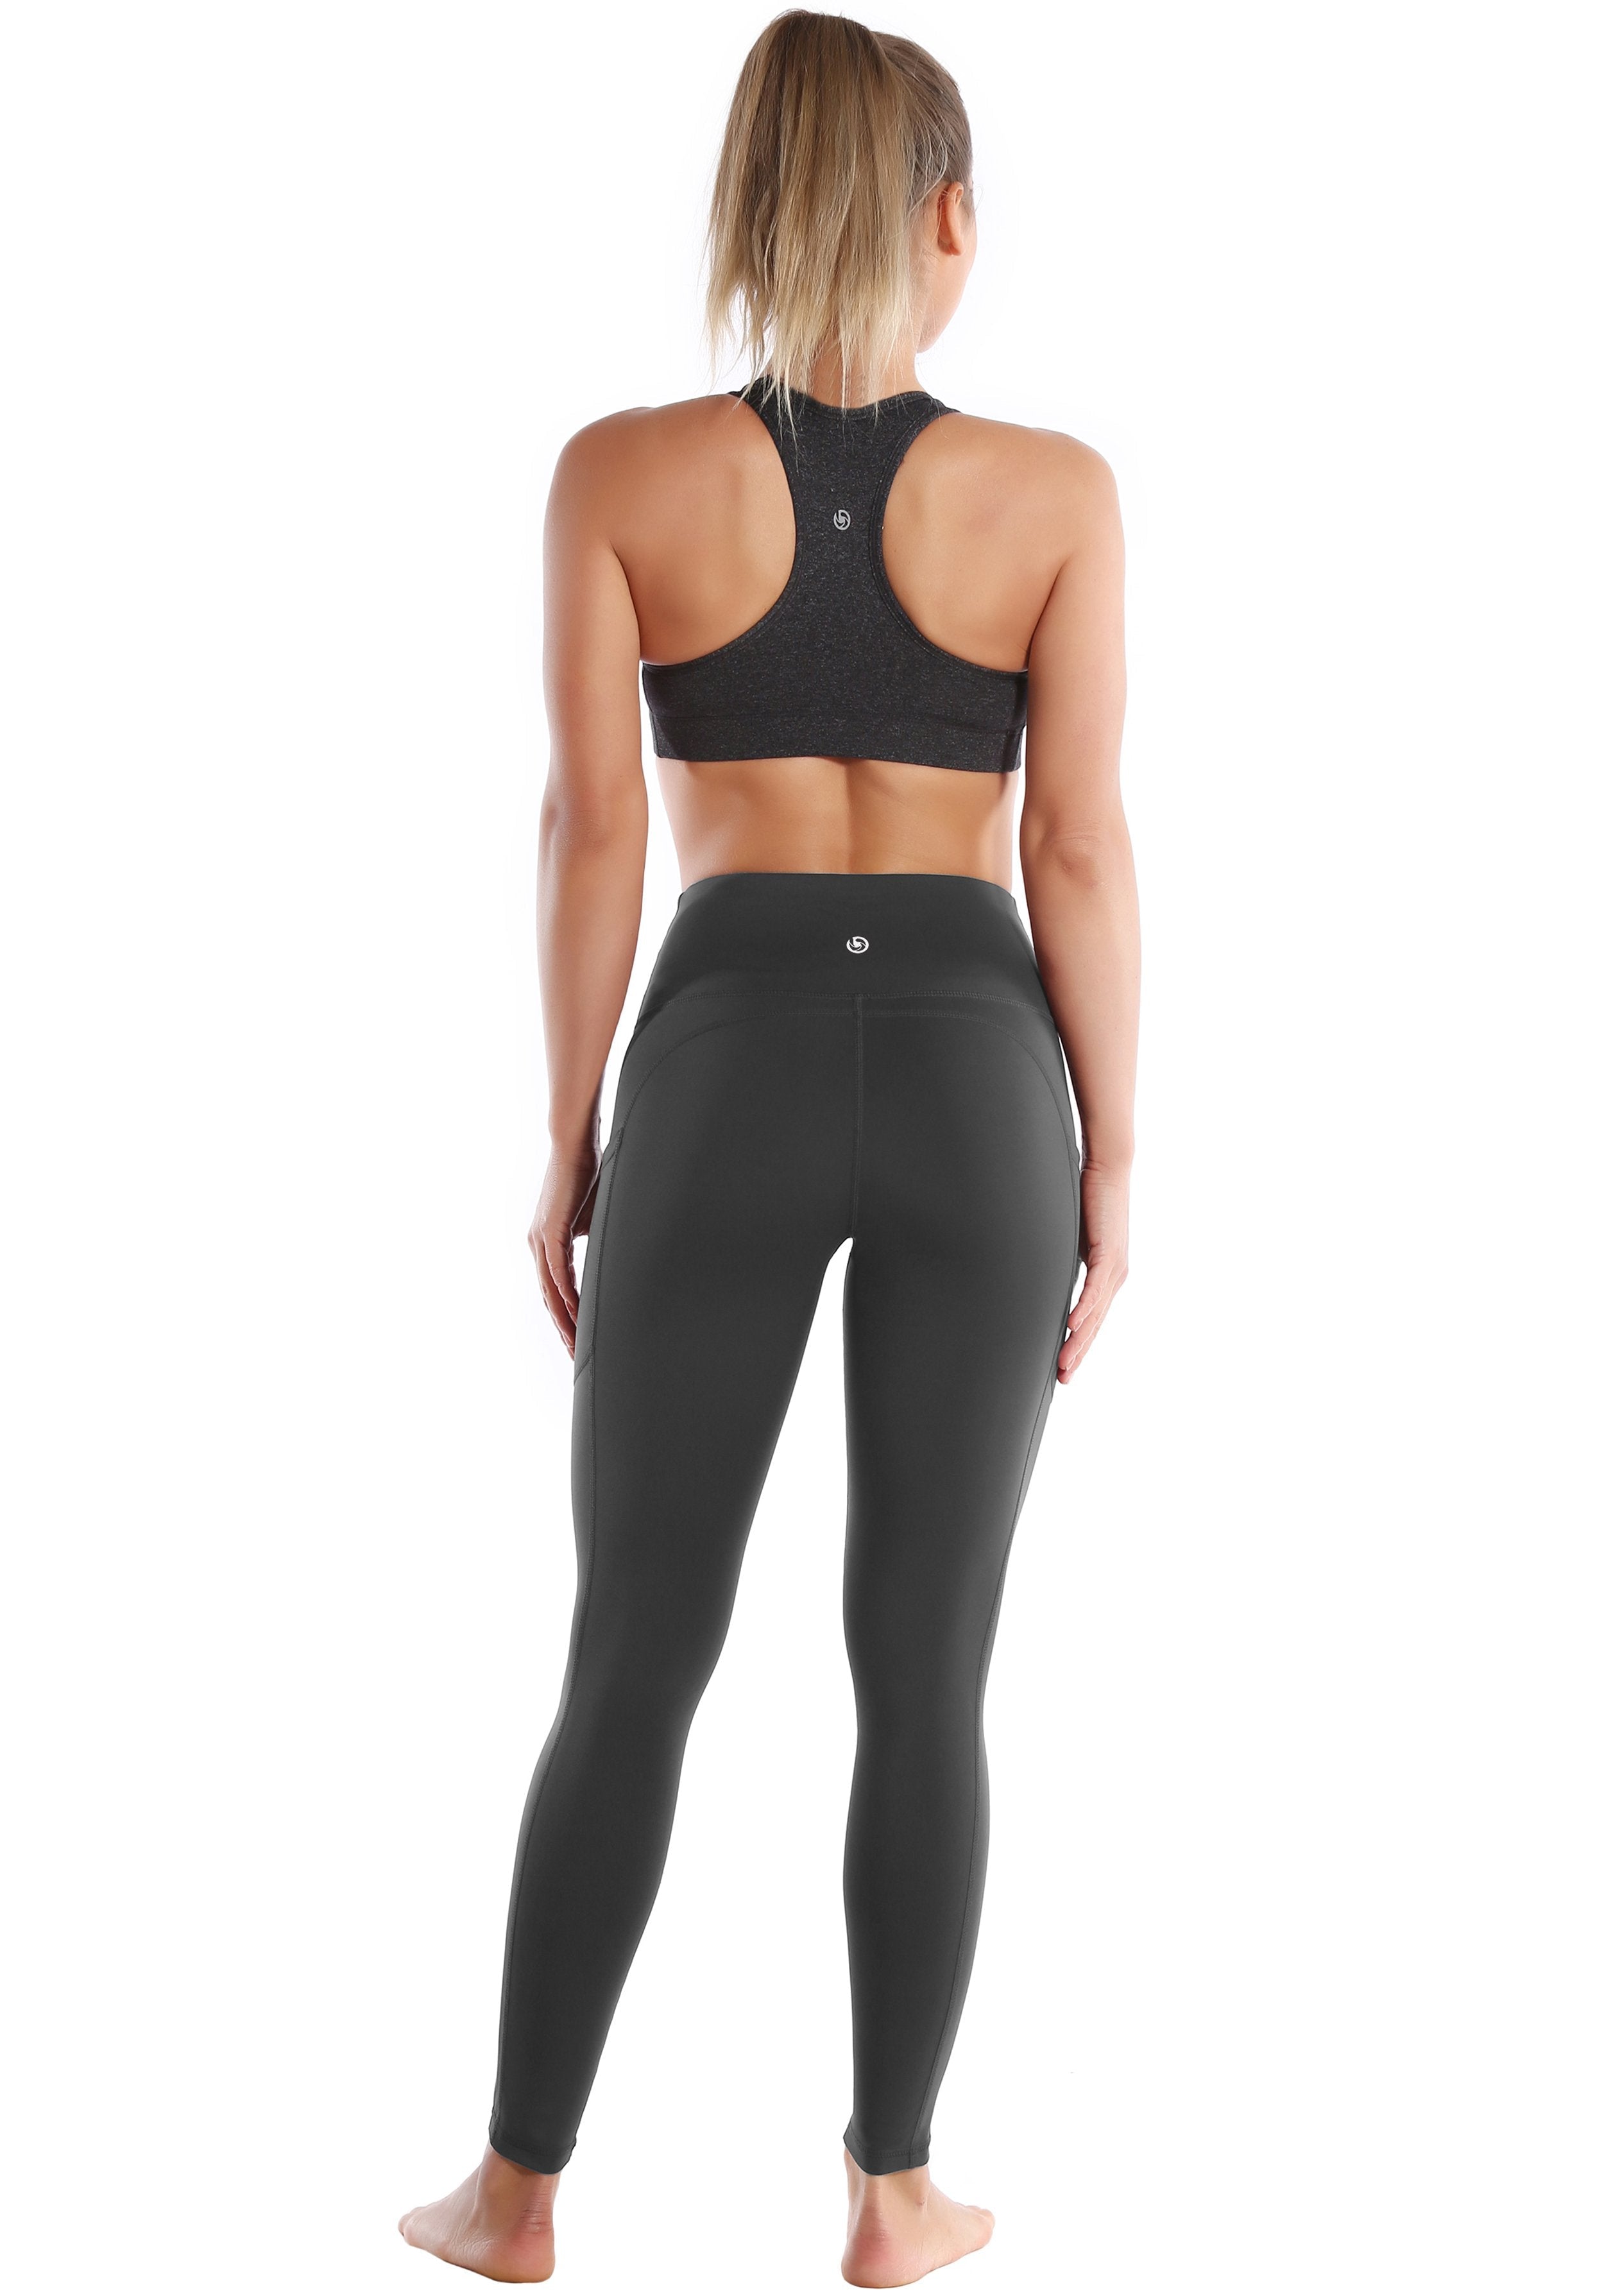 Hip Line Side Pockets Tall Size Pants shadowcharcoal Sexy Hip Line Side Pockets 75%Nylon/25%Spandex Fabric doesn't attract lint easily 4-way stretch No see-through Moisture-wicking Tummy control Inner pocket Two lengths